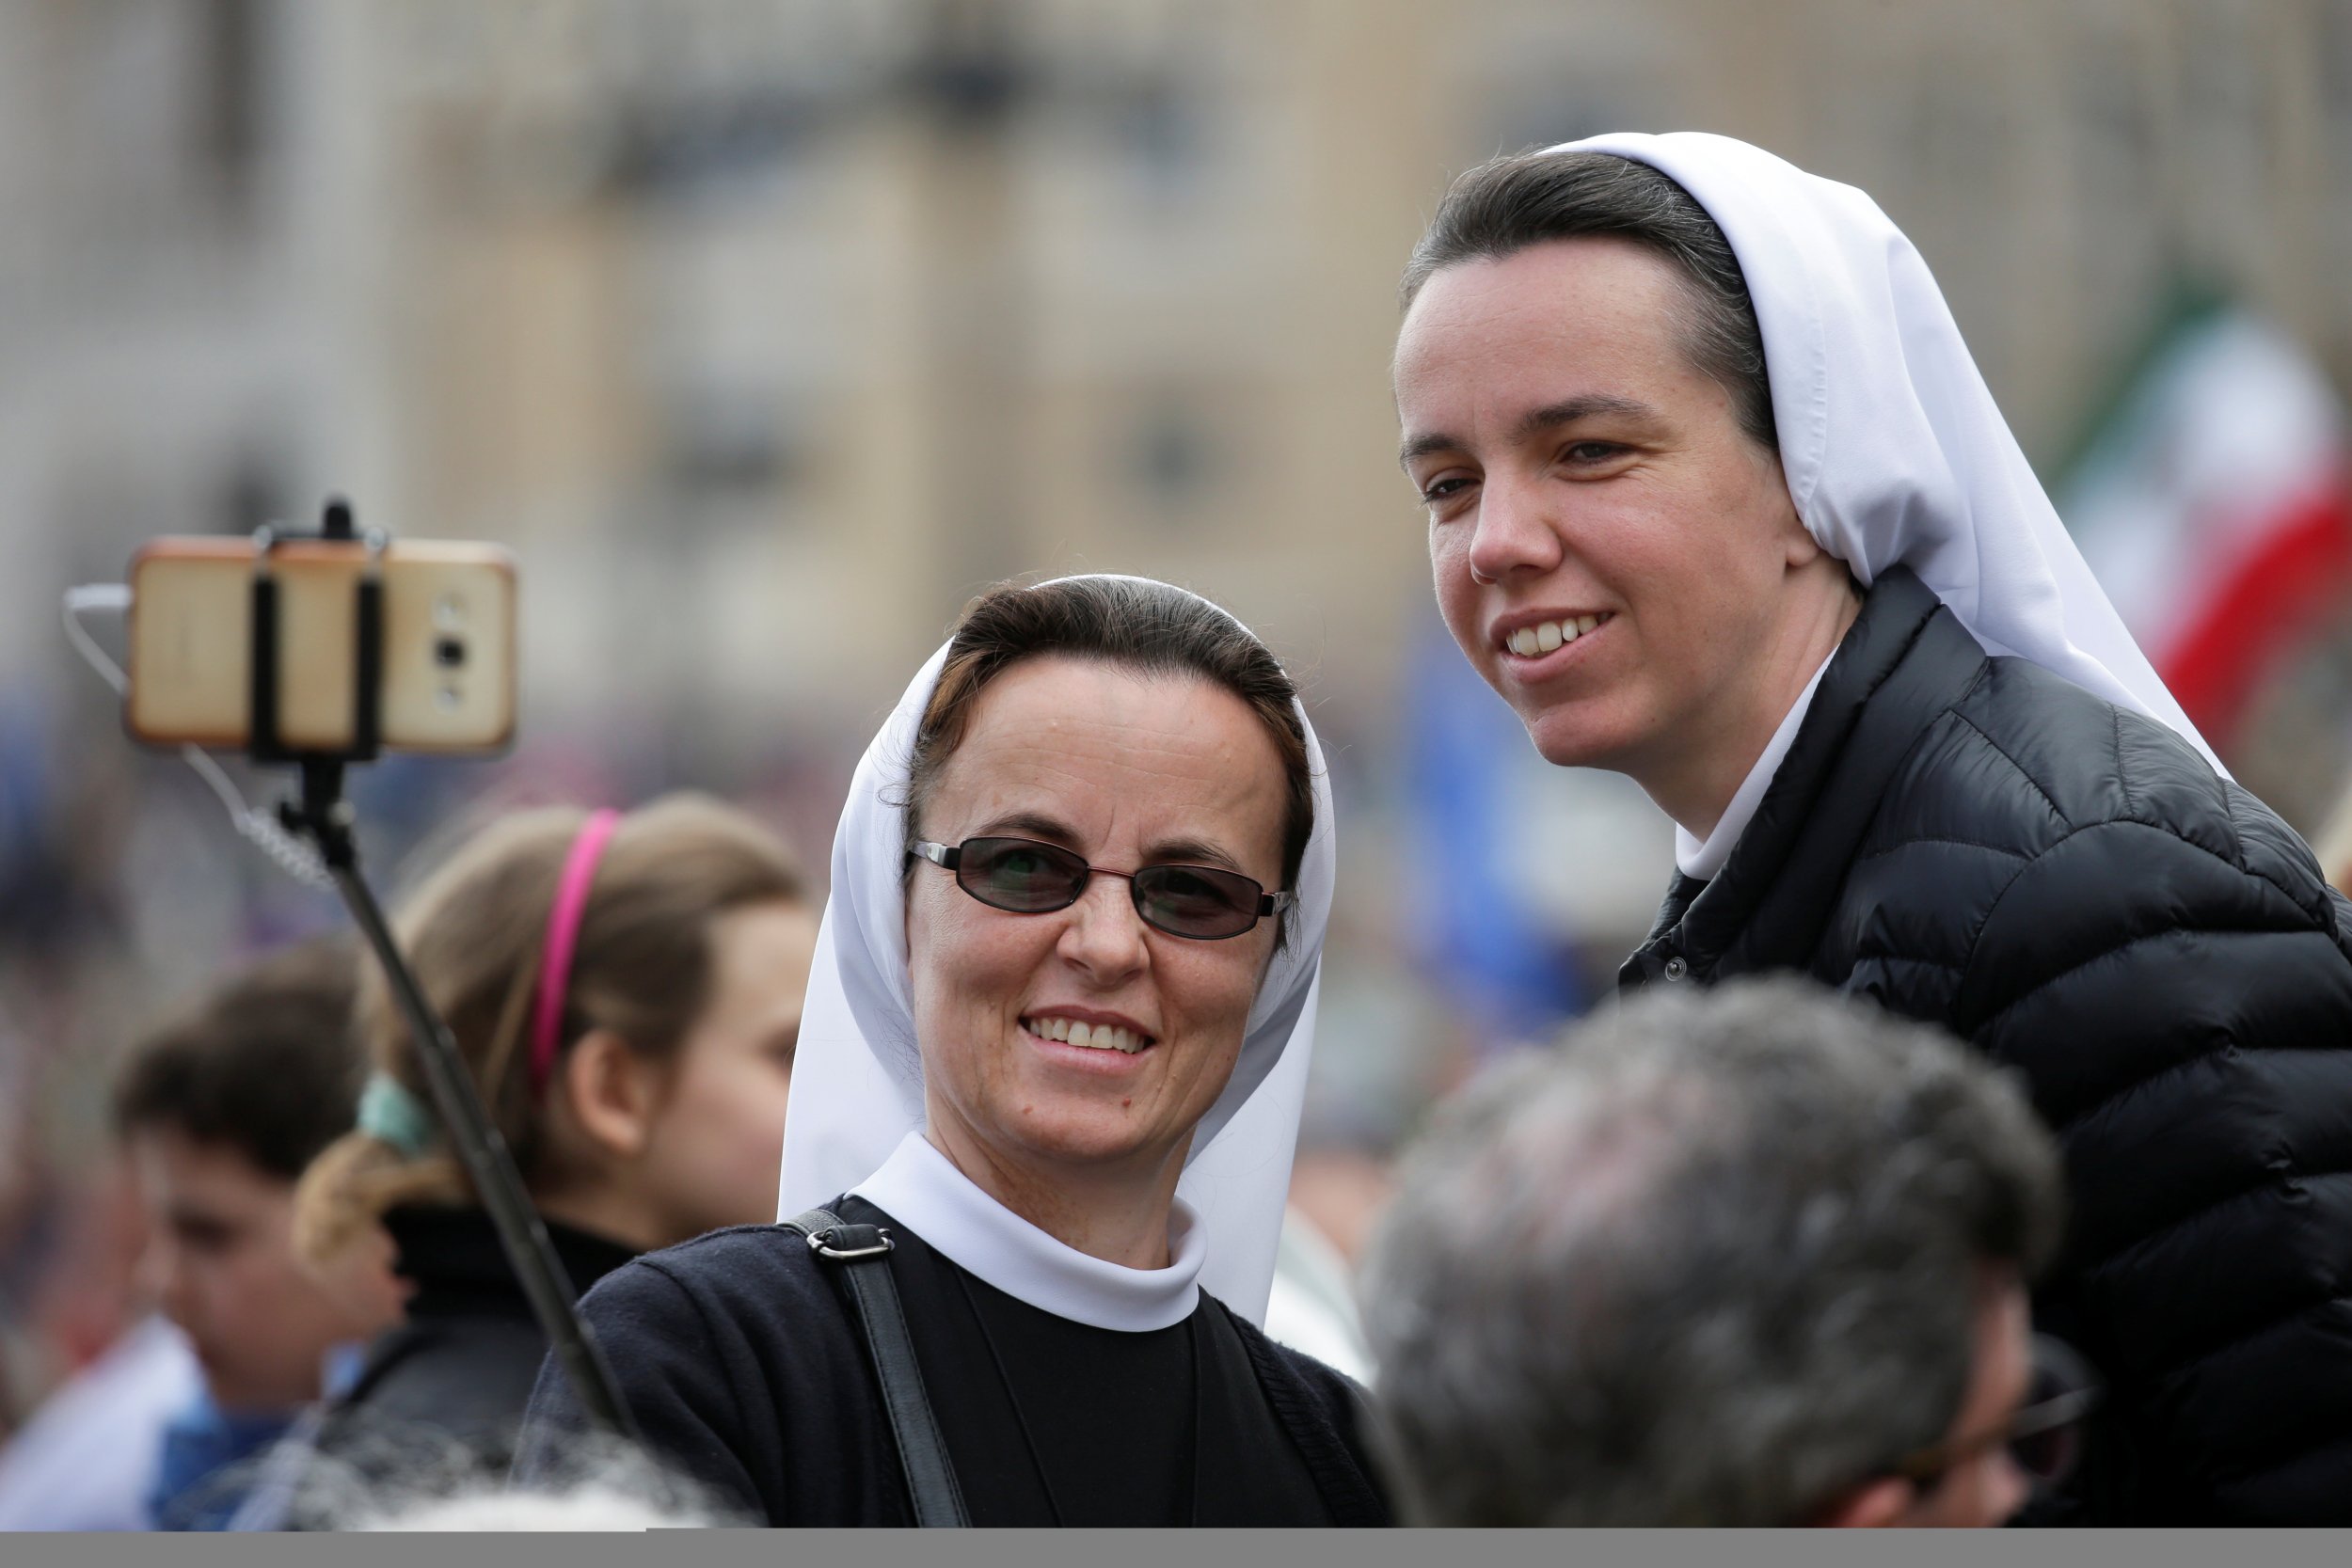 Nuns Told To Spend Less Time On Twitter And More On God